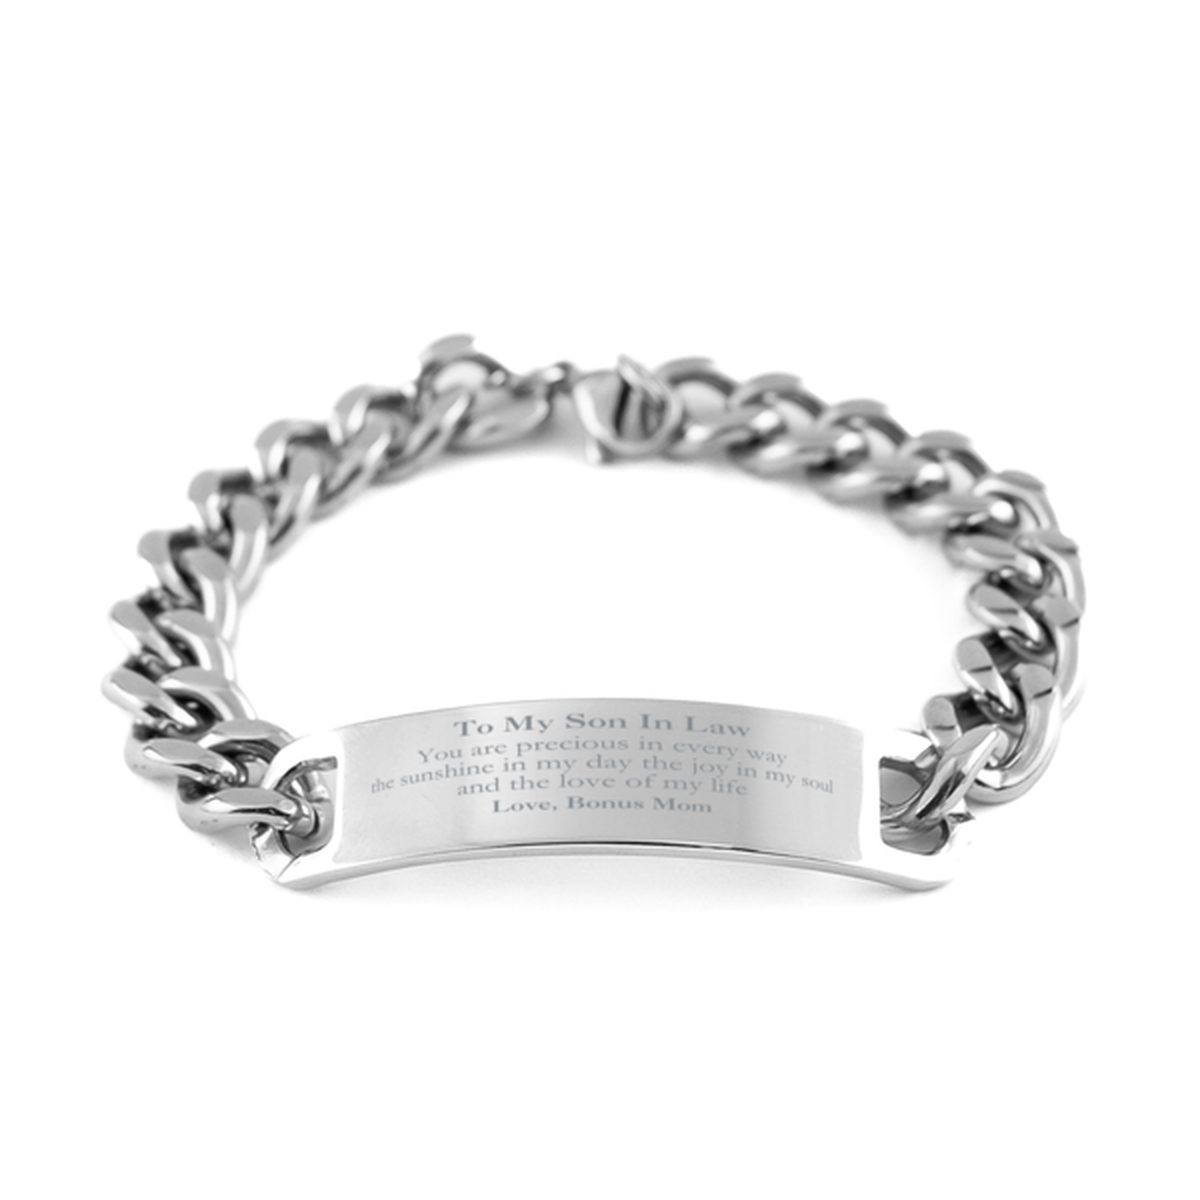 Graduation Gifts for Son In Law Cuban Chain Stainless Steel Bracelet Present from Bonus Mom, Christmas Son In Law Birthday Gifts Son In Law You are precious in every way the sunshine in my day. Love, Bonus Mom